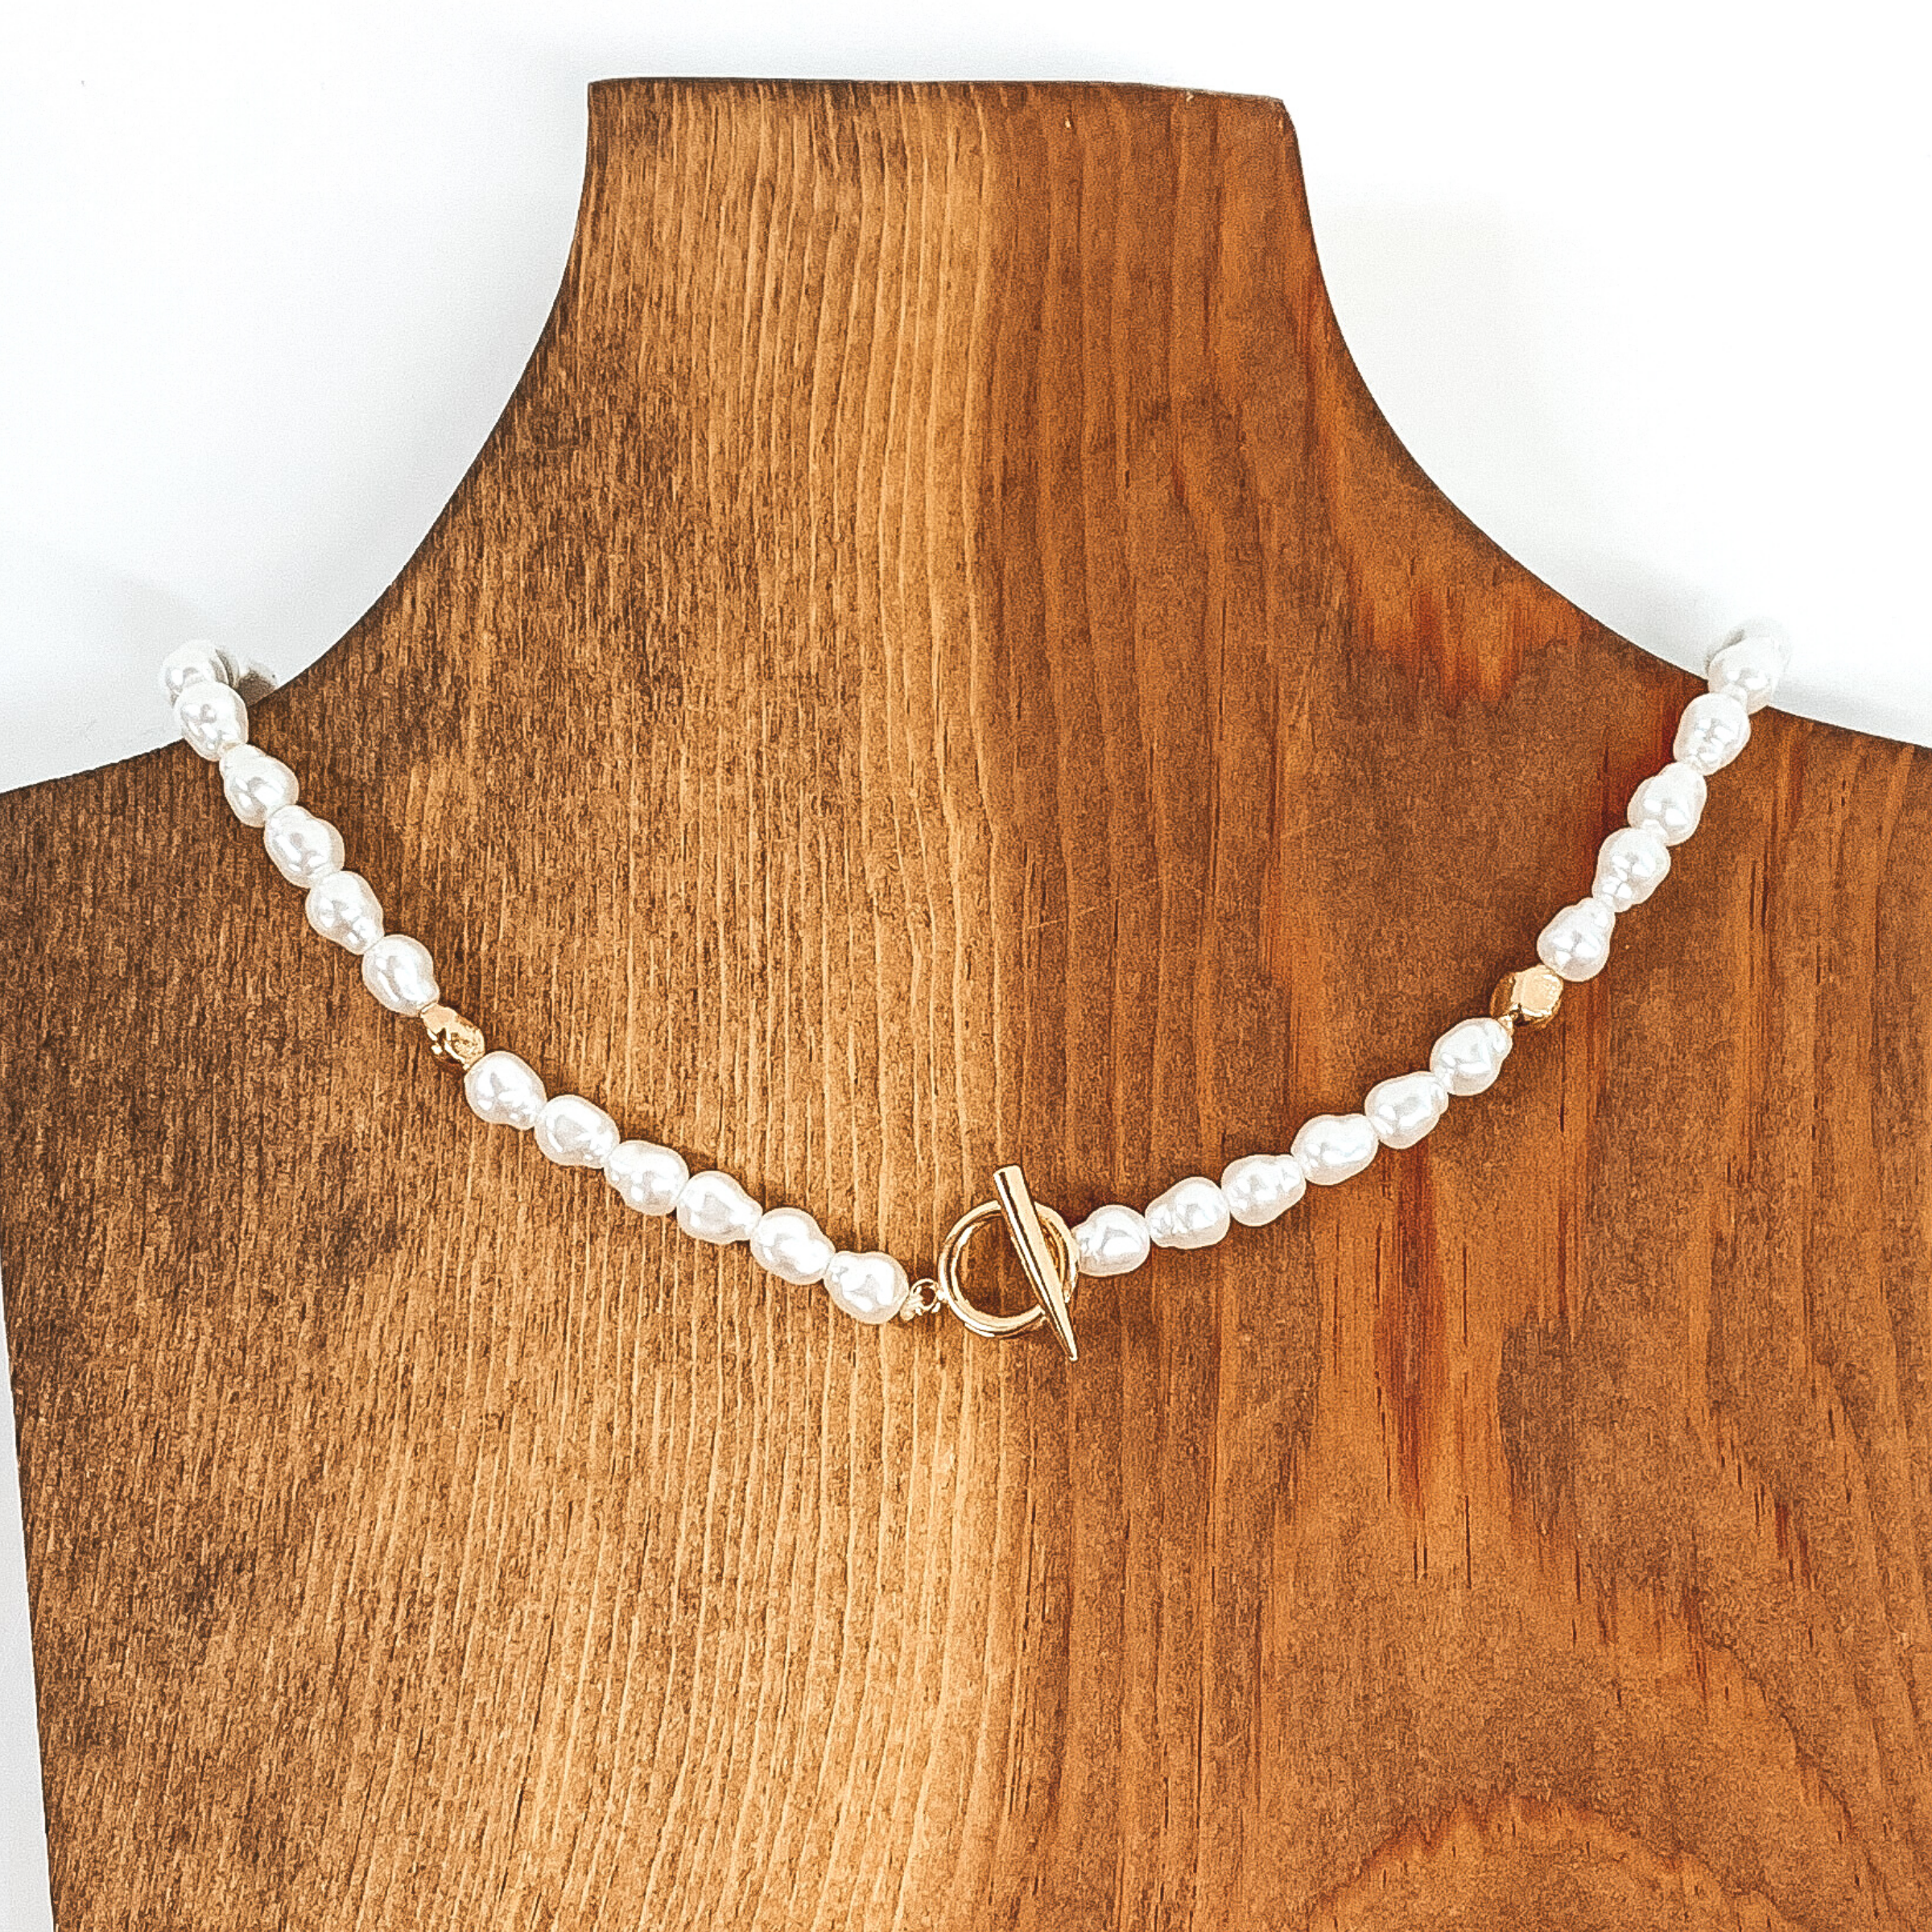 This necklace has white pearl like beads with one gold bead on each side of the gold toggle clasp. This necklace is pictured laying on a piece of wood colored necklace holder on a white background. 